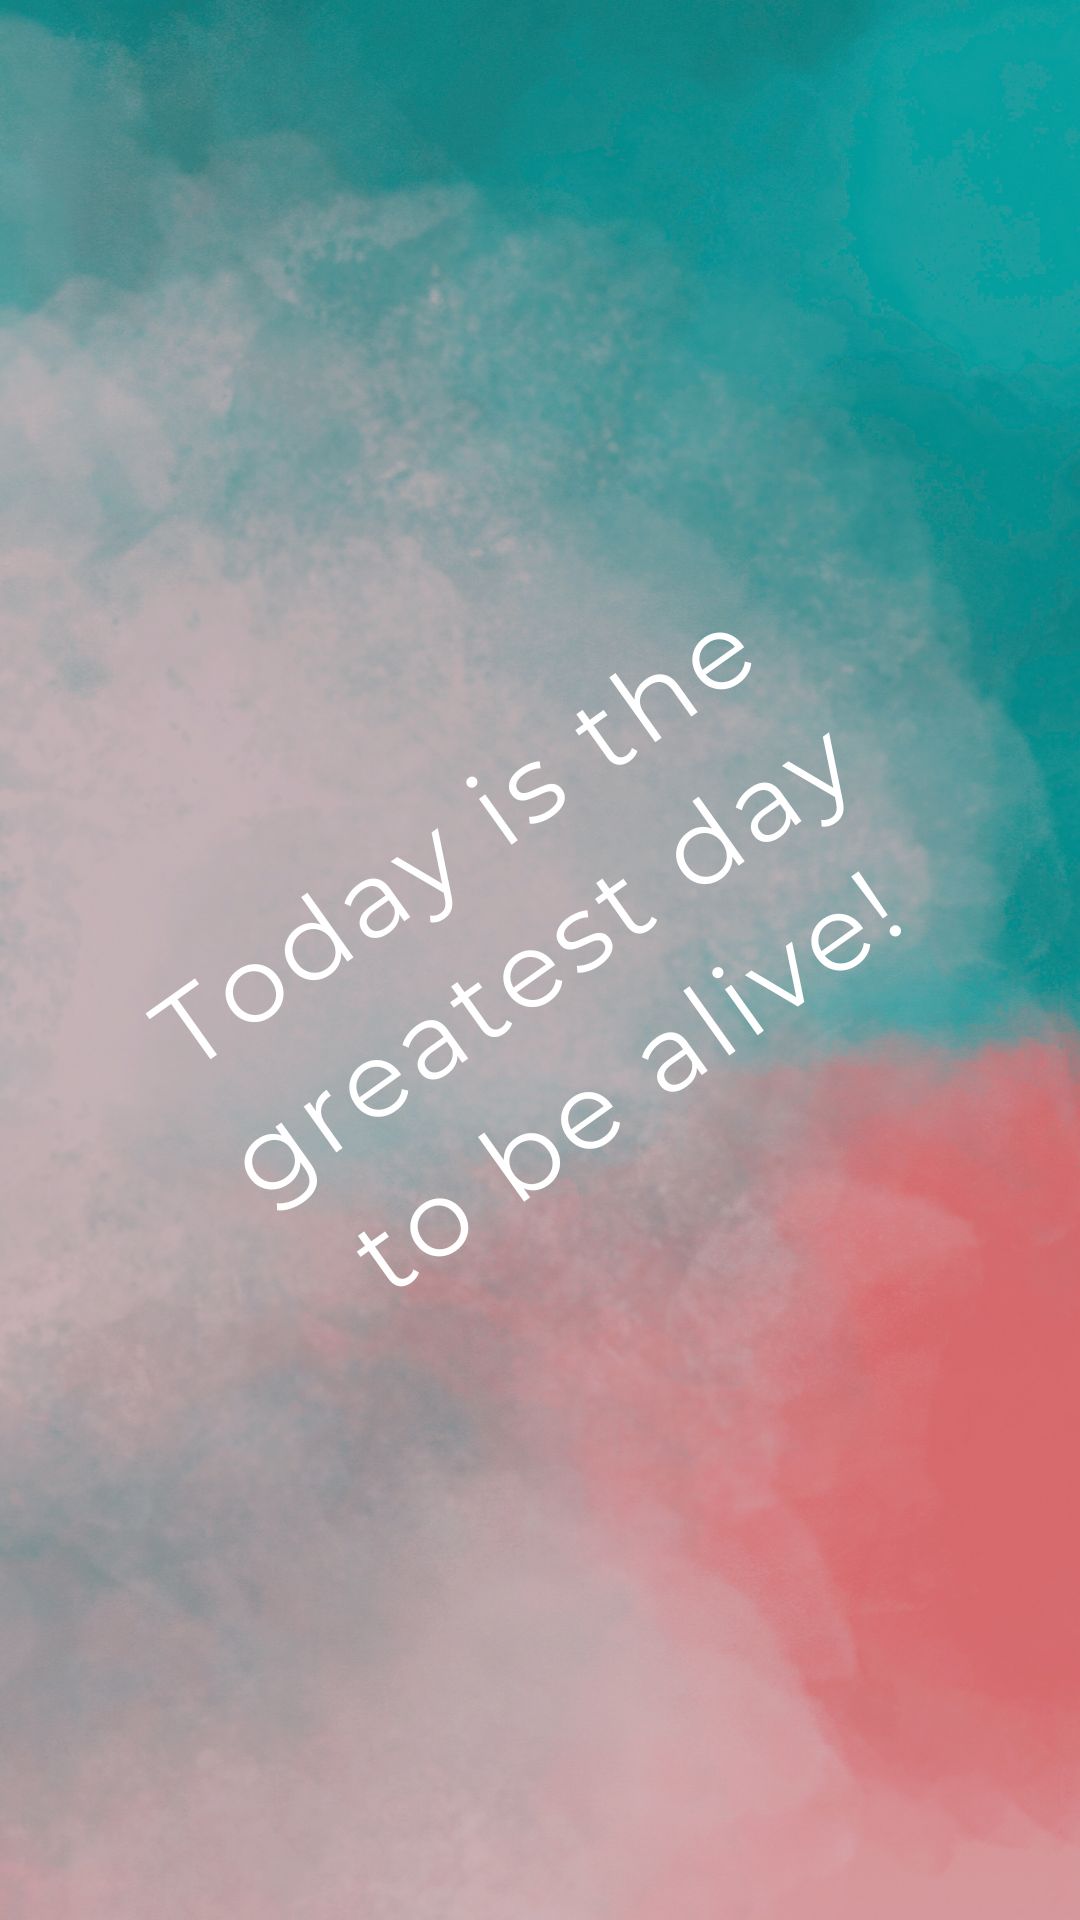 Today is the greatest day to be alive!